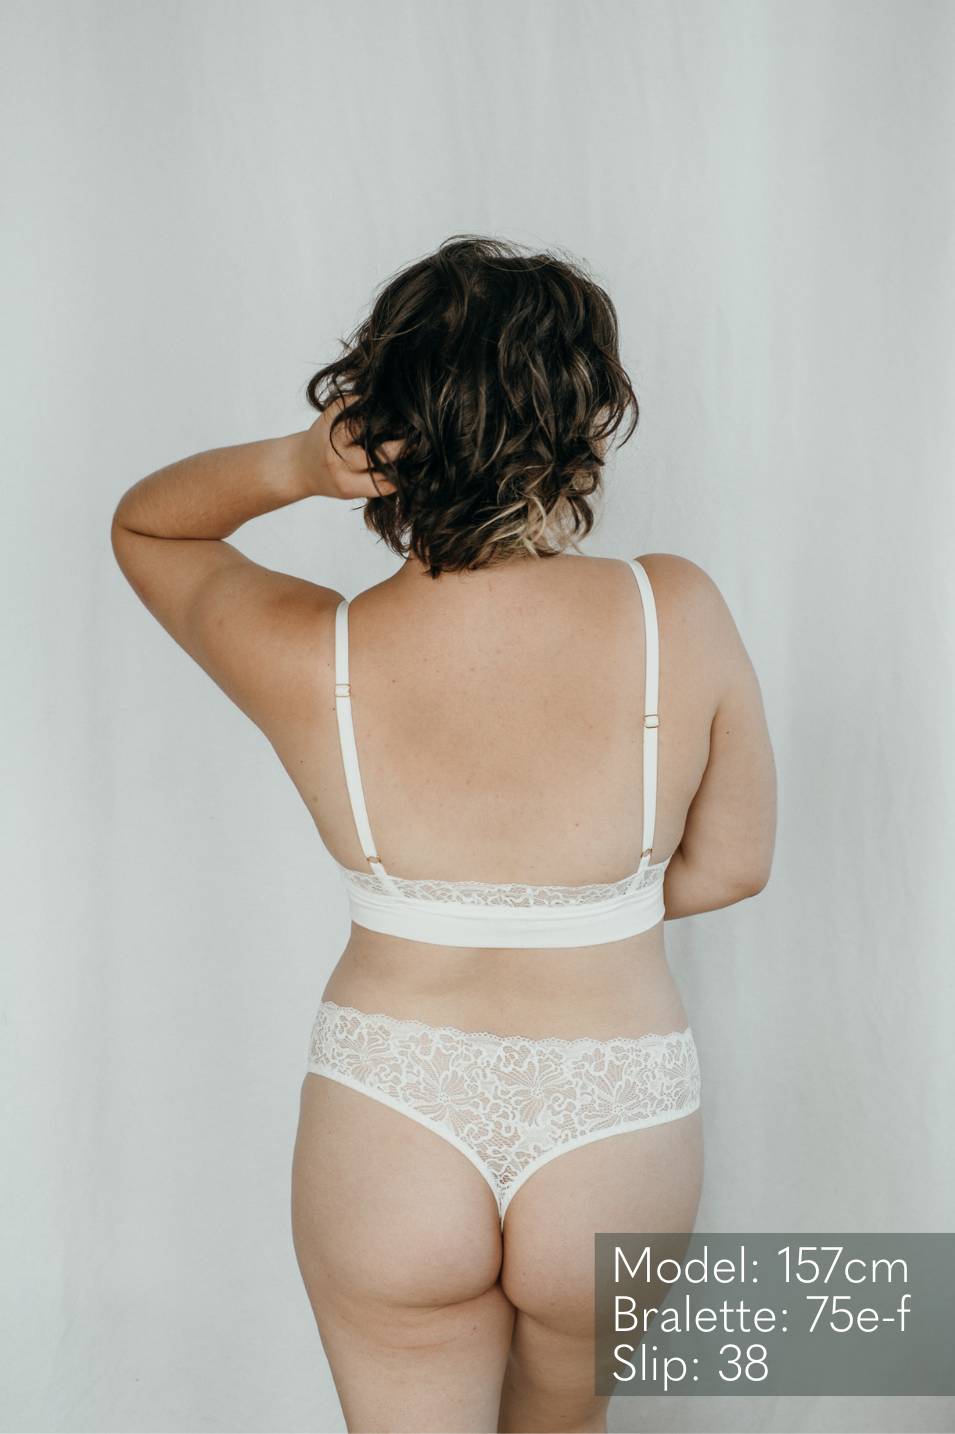 Back view of Lana in white, the lingerie set from thoughts of september